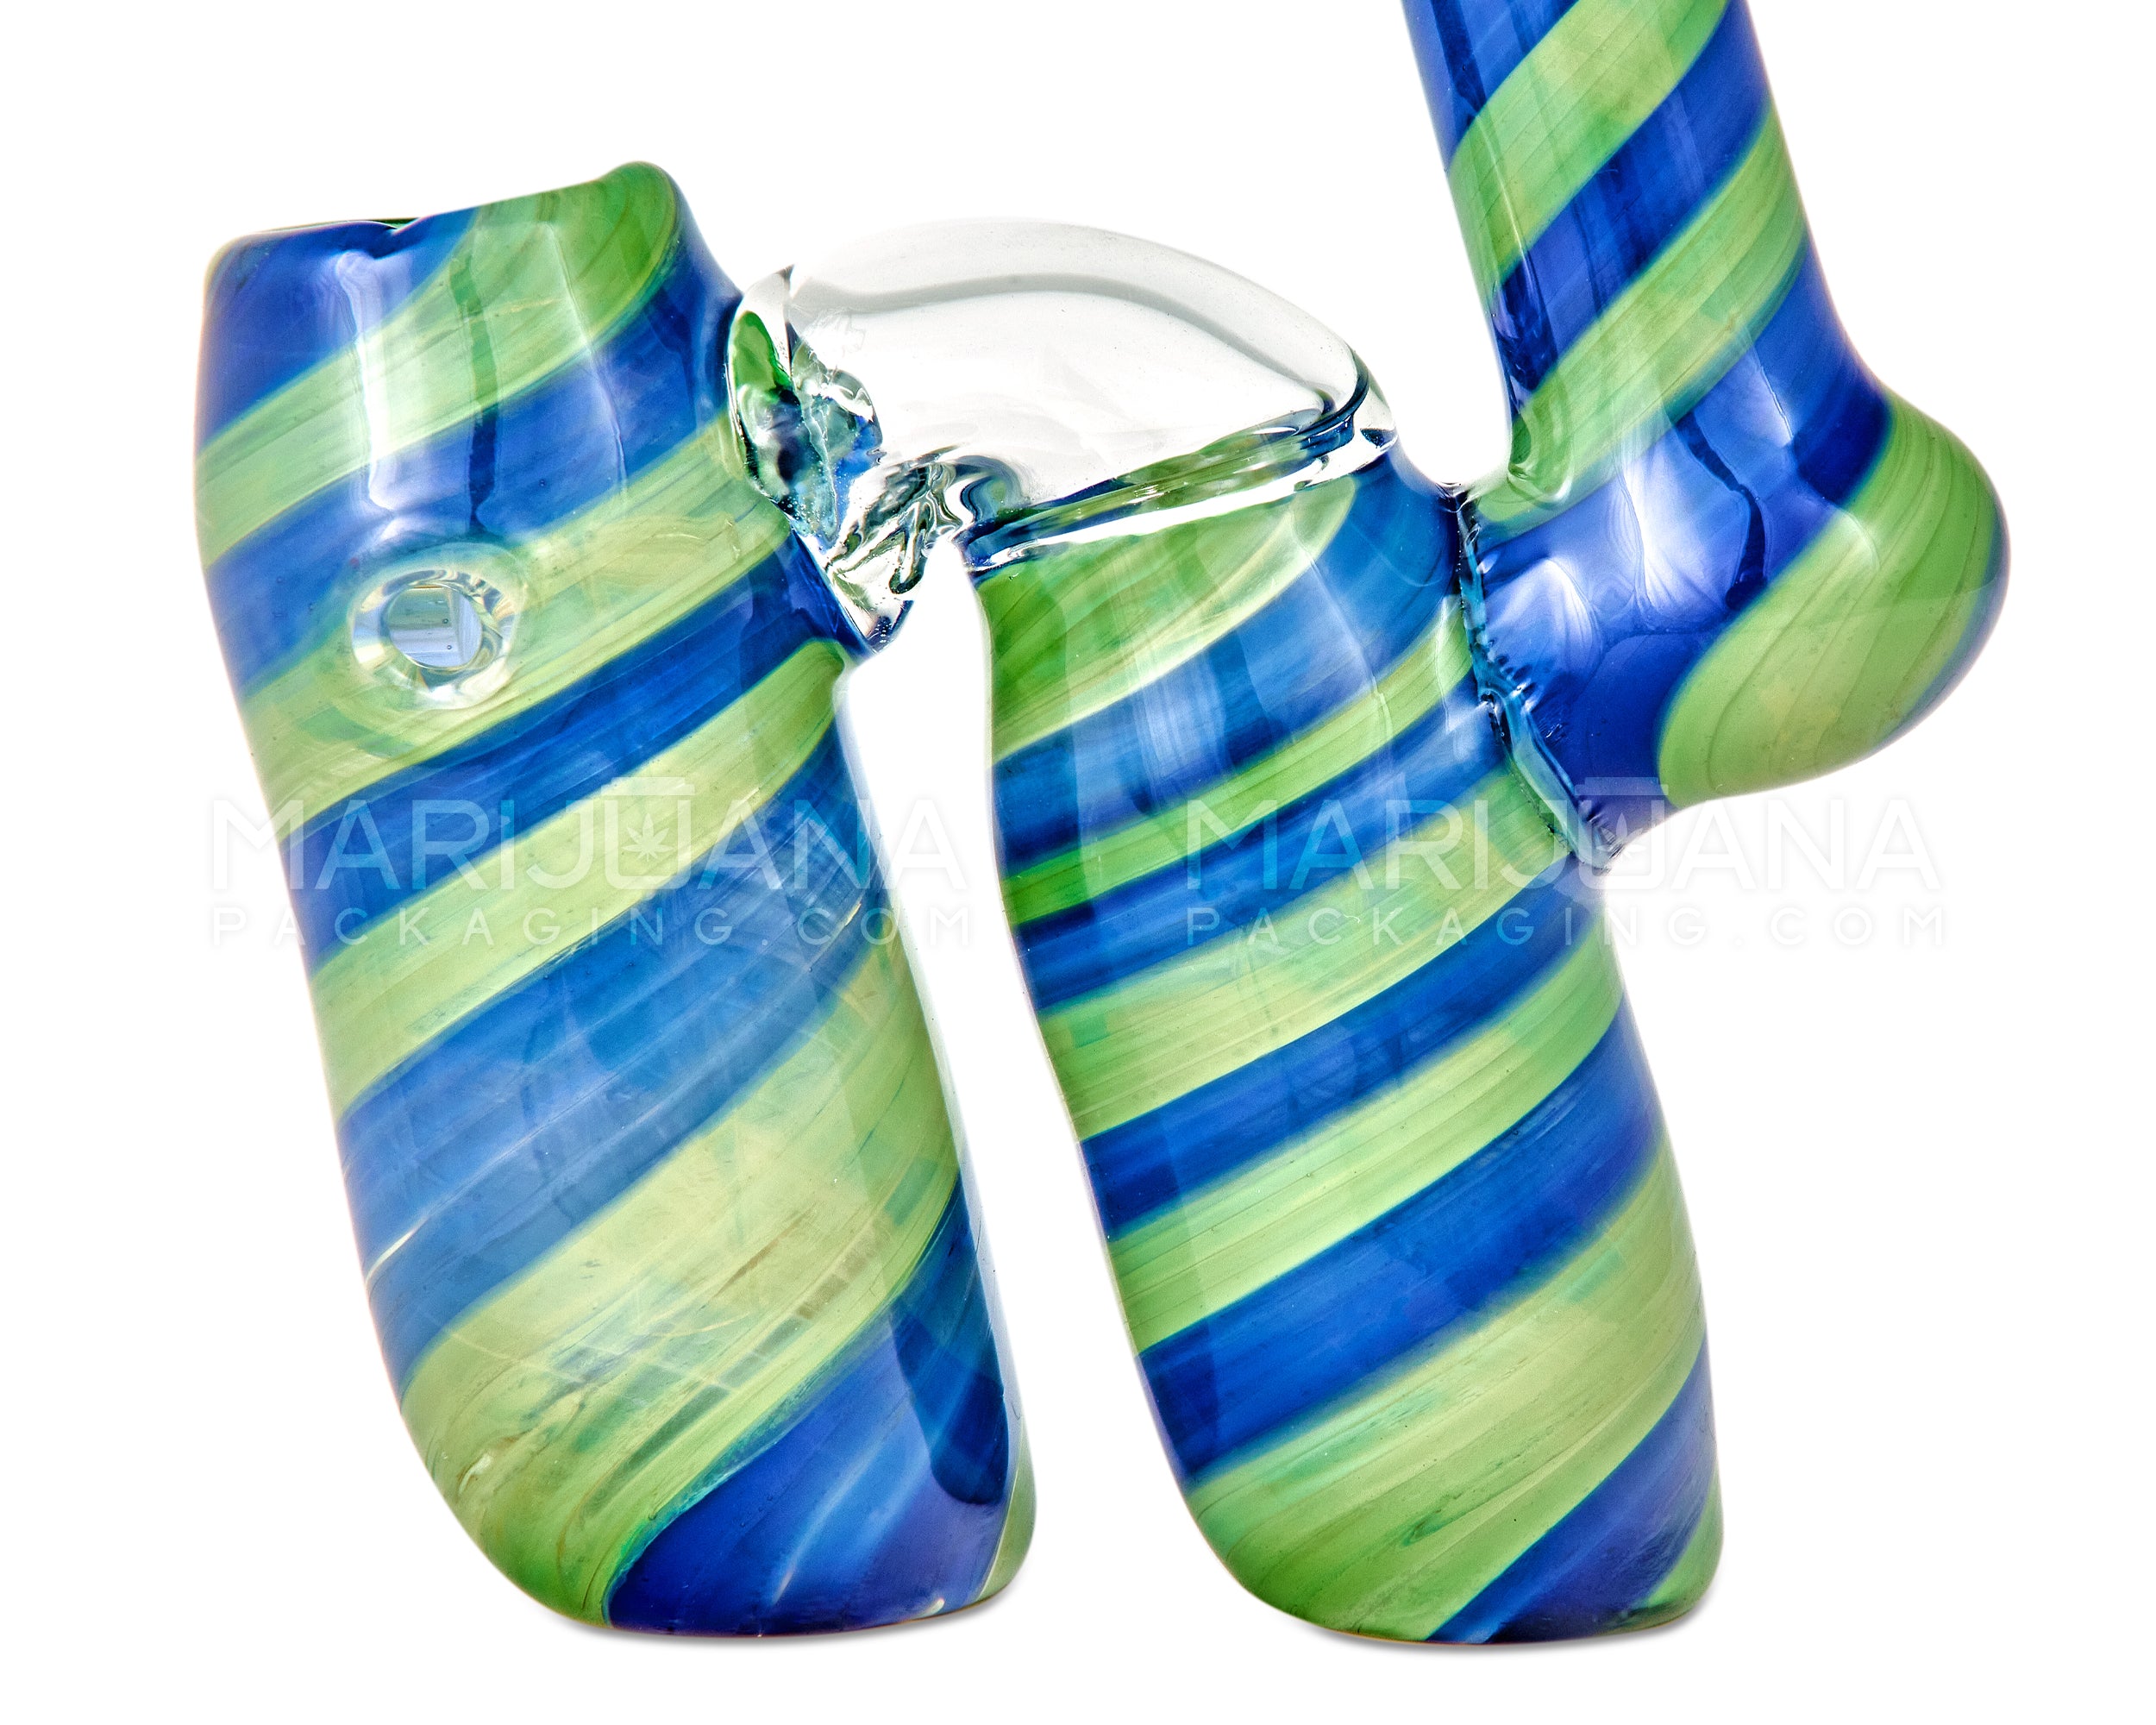 Spiral Double Chamber Bubbler | 6.5in Tall - Glass - Blue & Green - 4